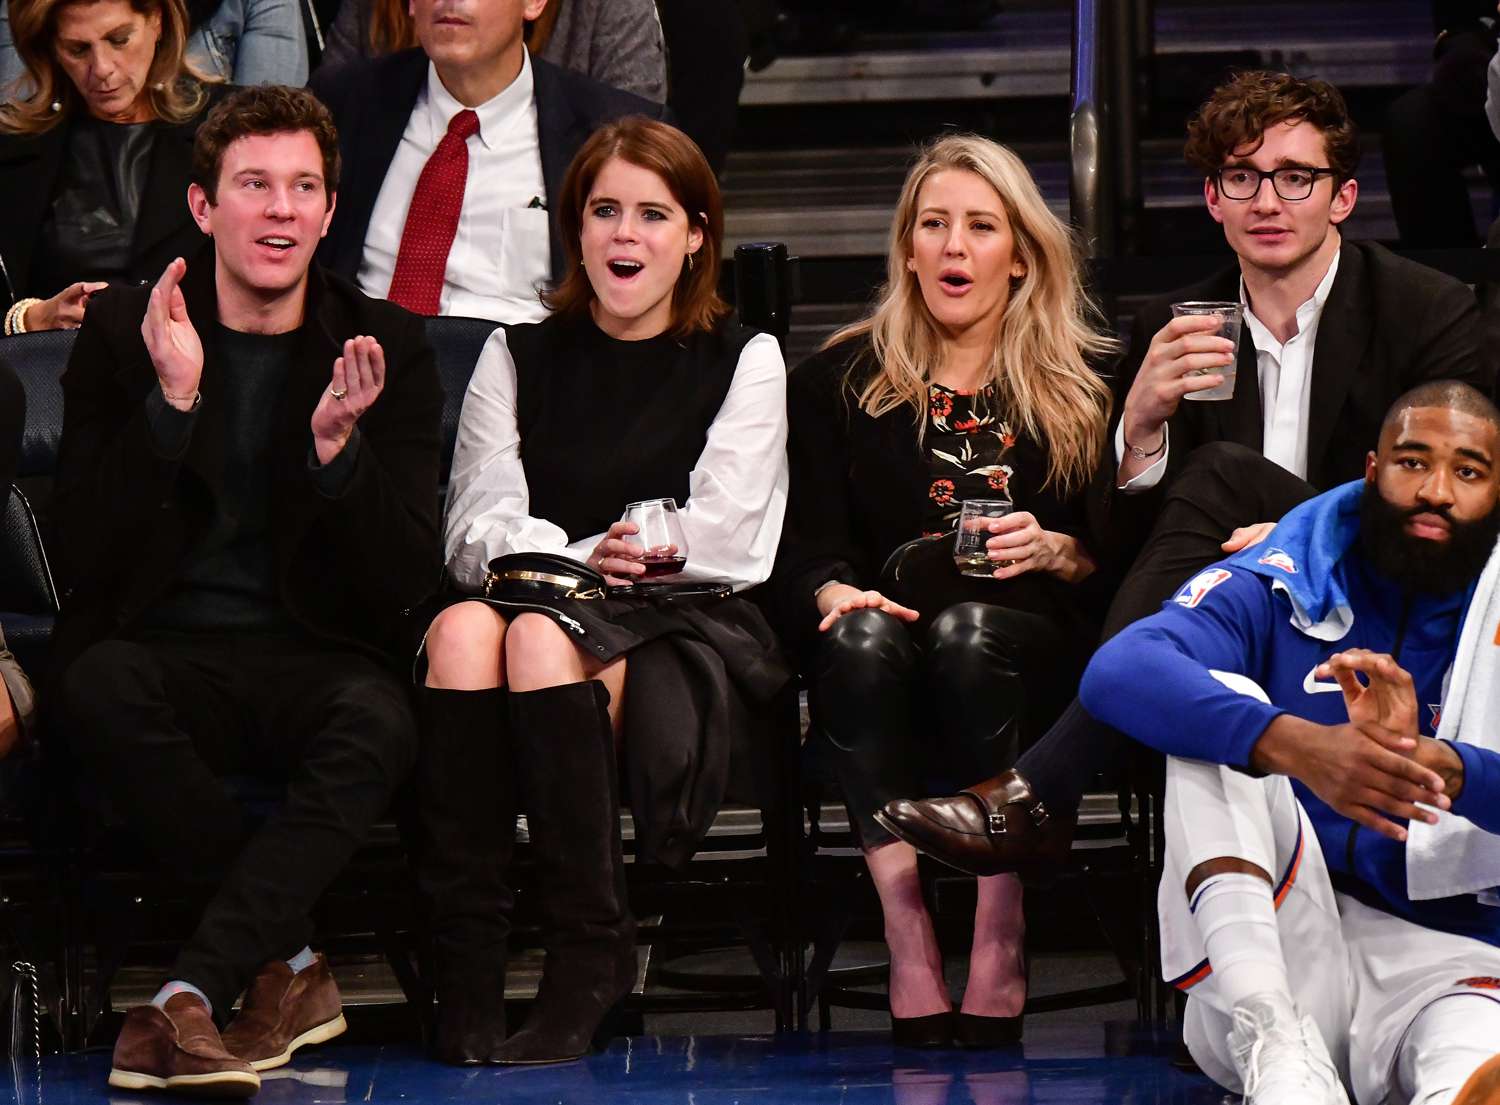 Jack Brooksbank, Princess Eugenie of York, Ellie Goulding and Caspar Jopling attend the Brooklyn Nets Vs New York Knicks game at Madison Square Garden on October 27, 2017 in New York City.